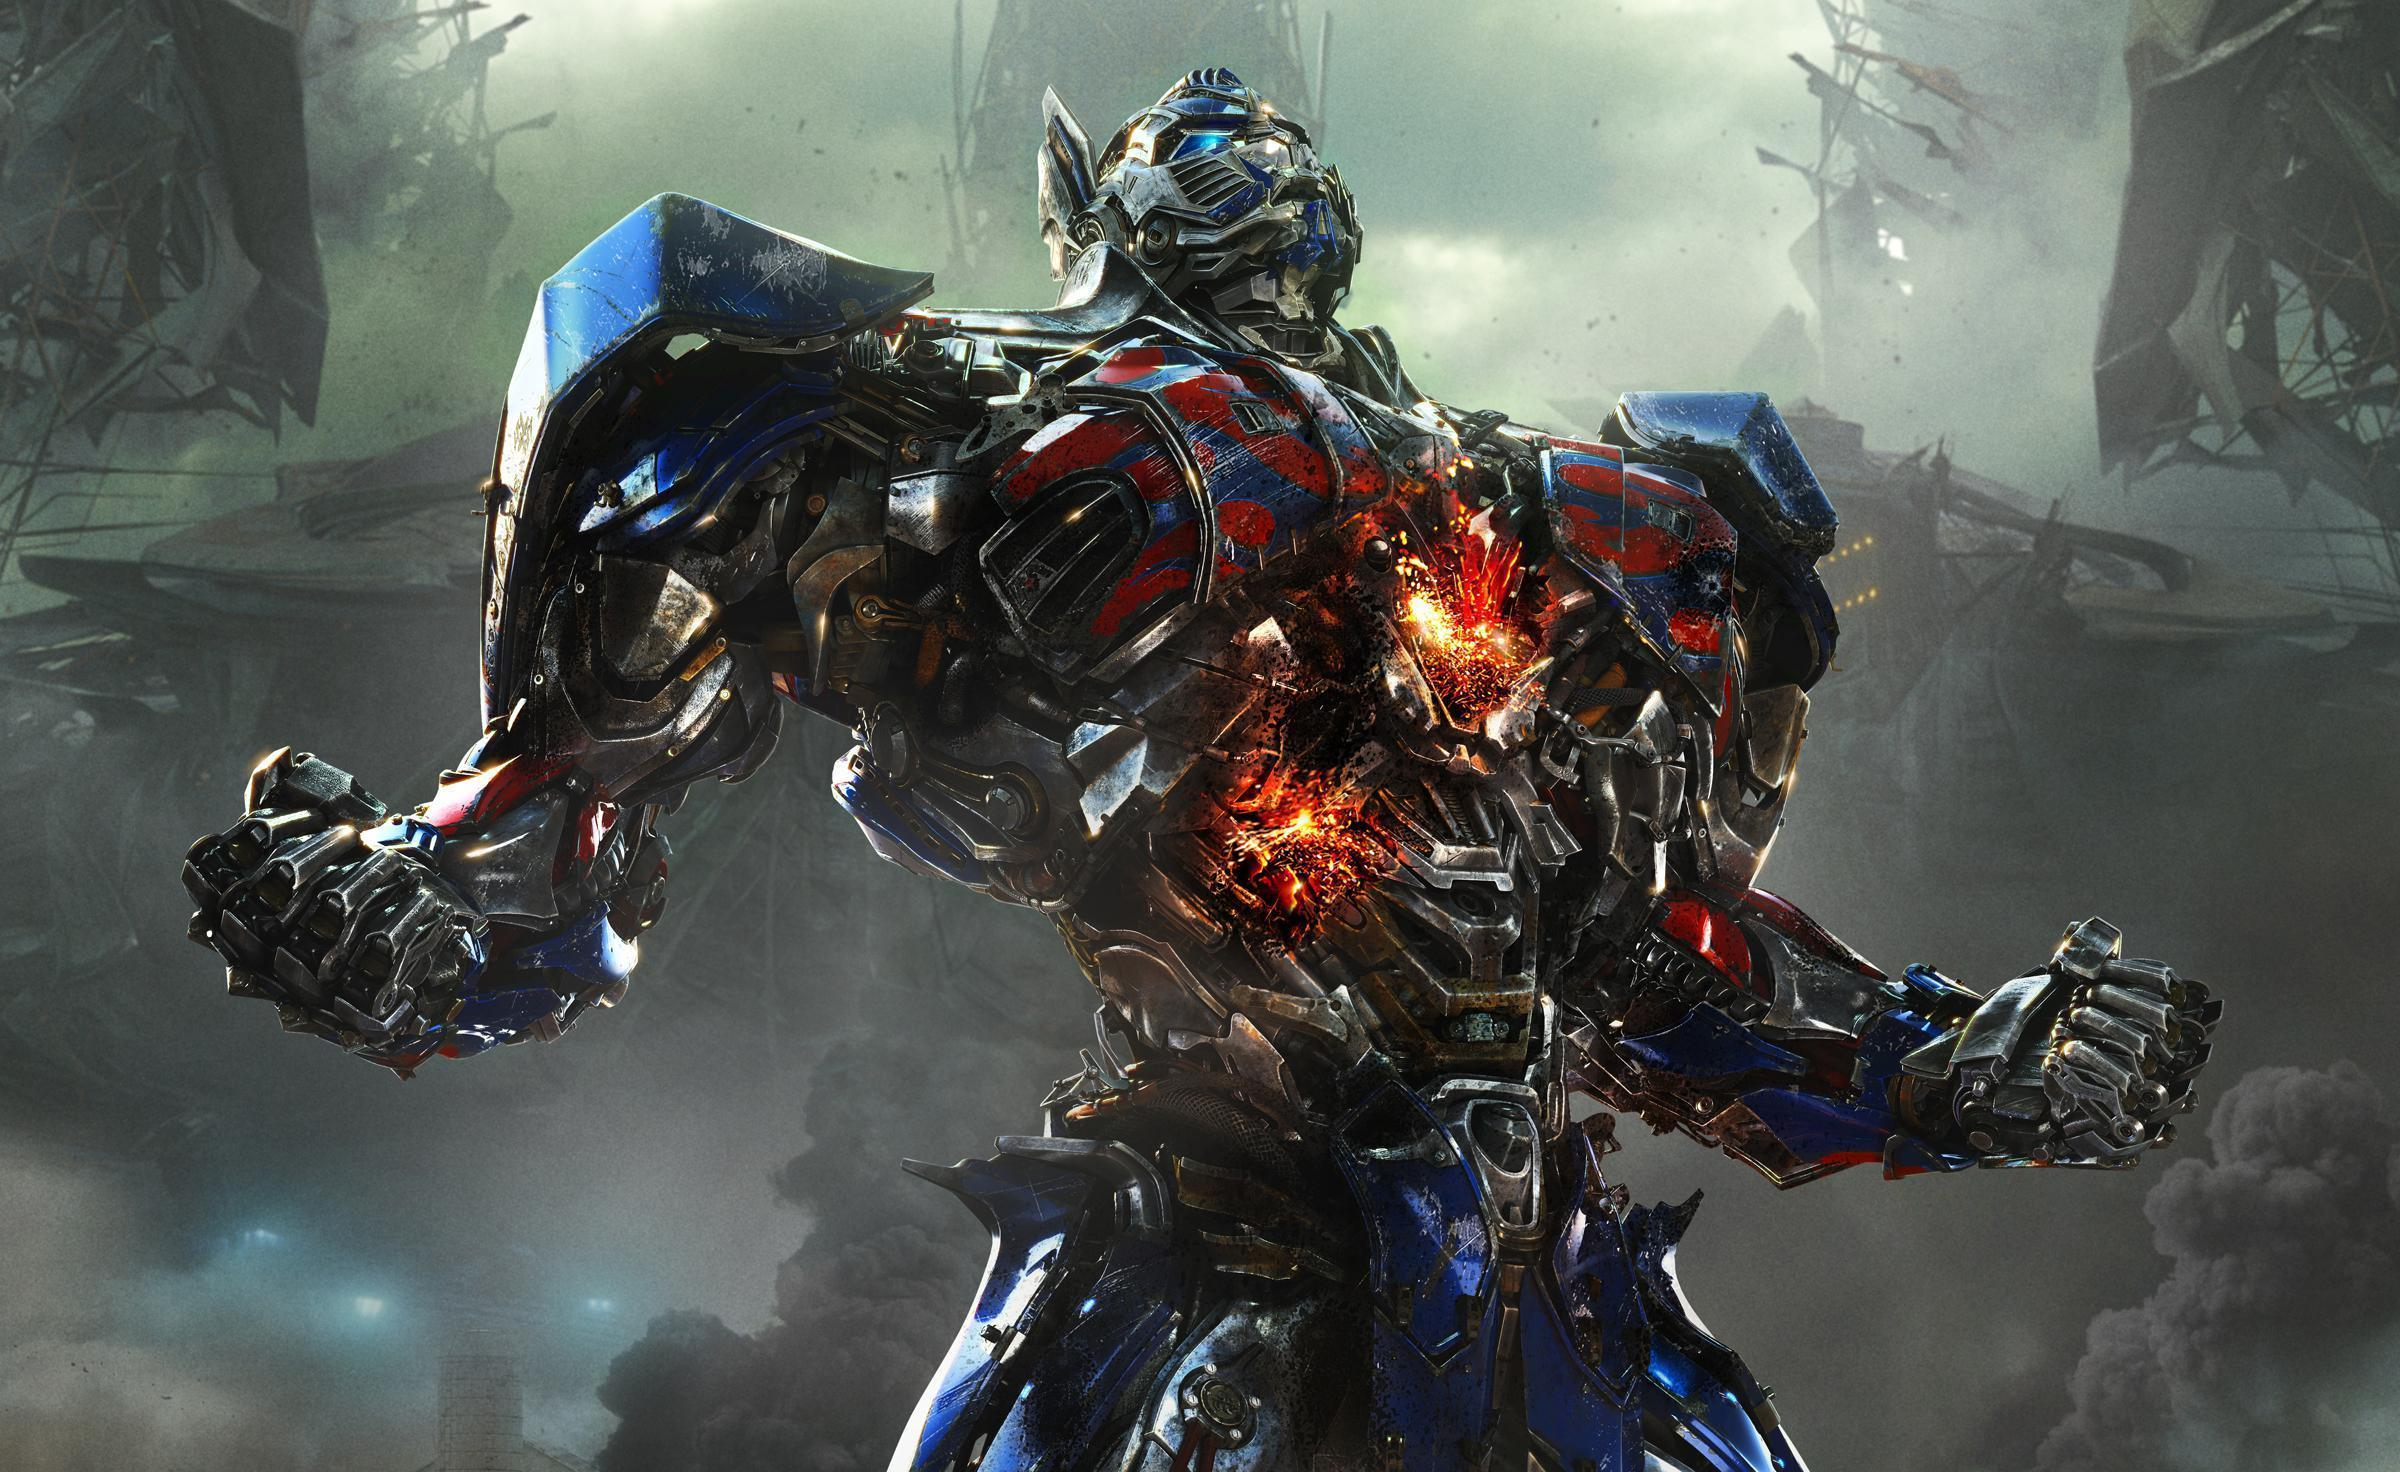 2400x1472 Transformers 4 Wallpapers Top Free Transformers 4 Backgrounds